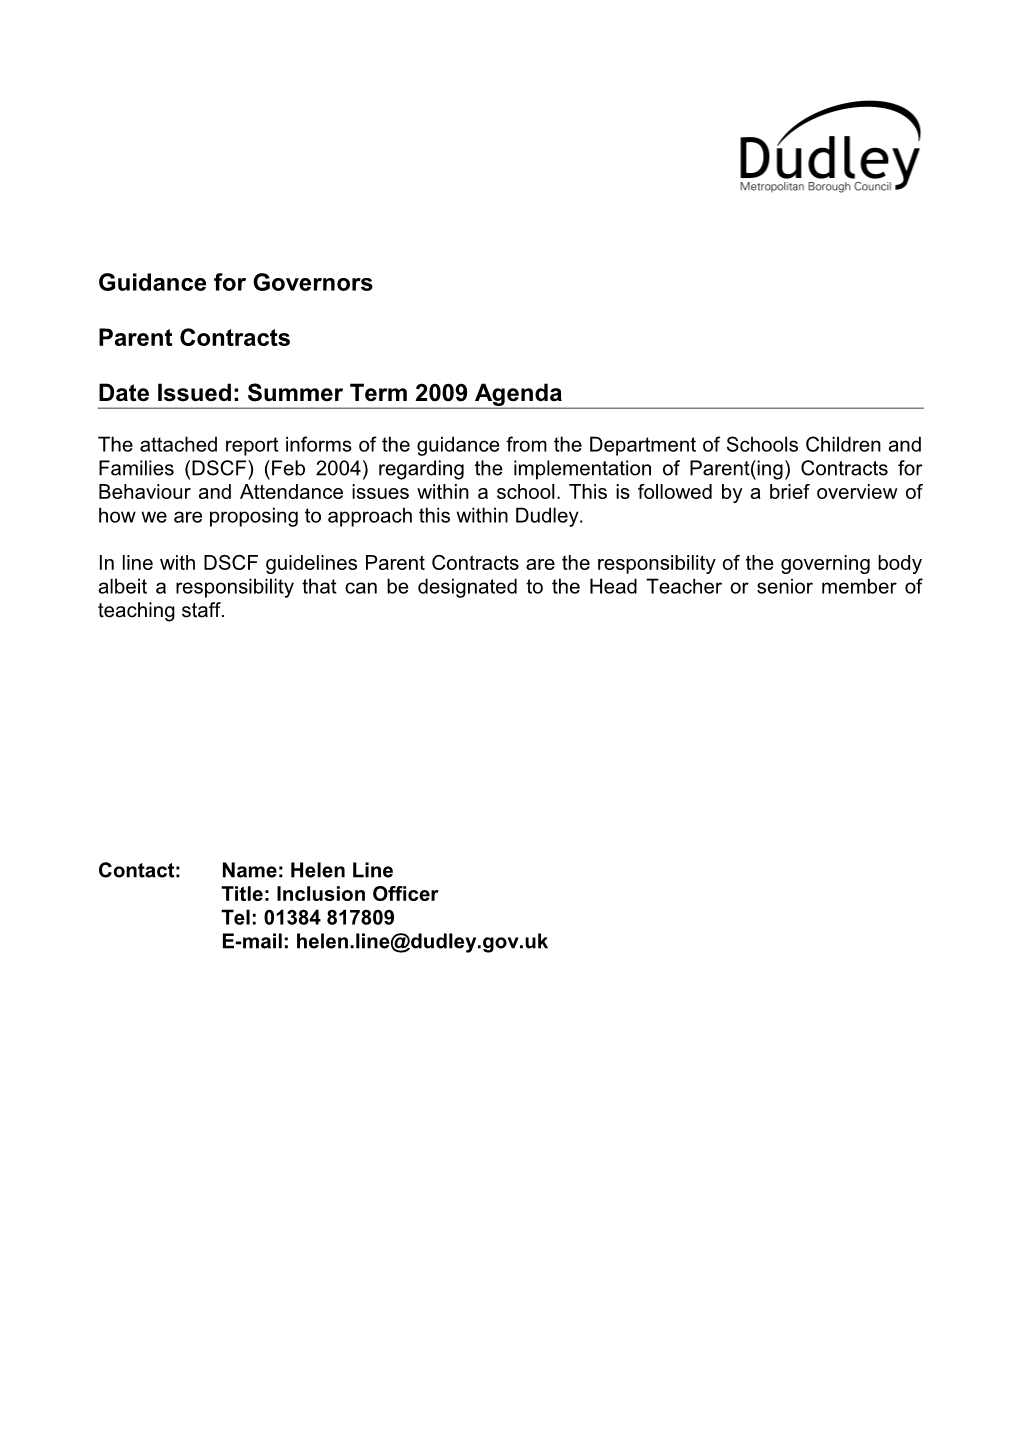 Guidance for Governing Bodies